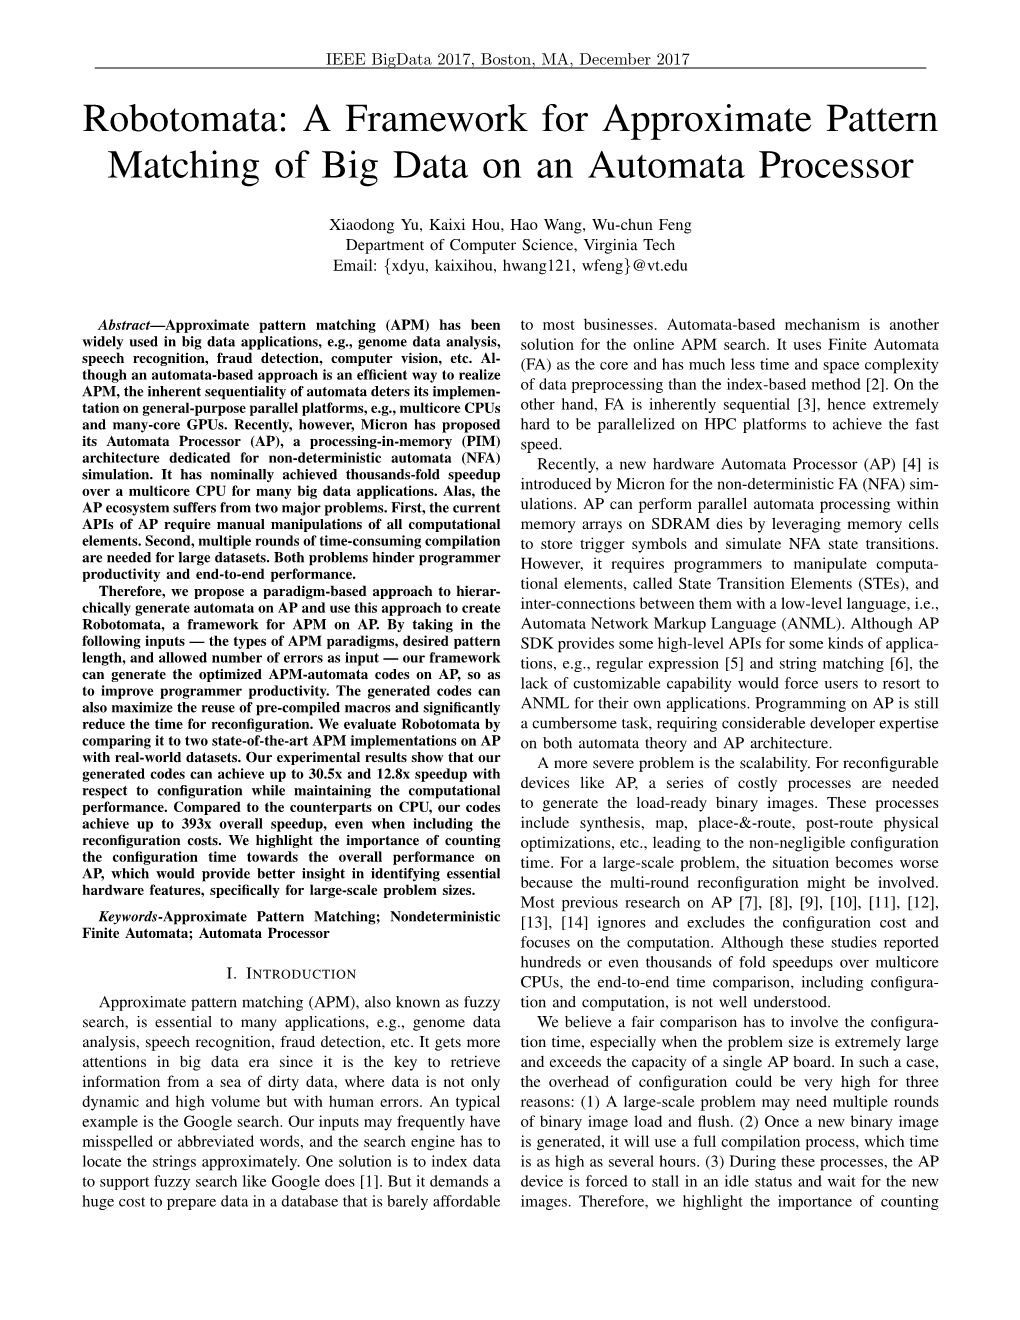 Robotomata: a Framework for Approximate Pattern Matching of Big Data on an Automata Processor